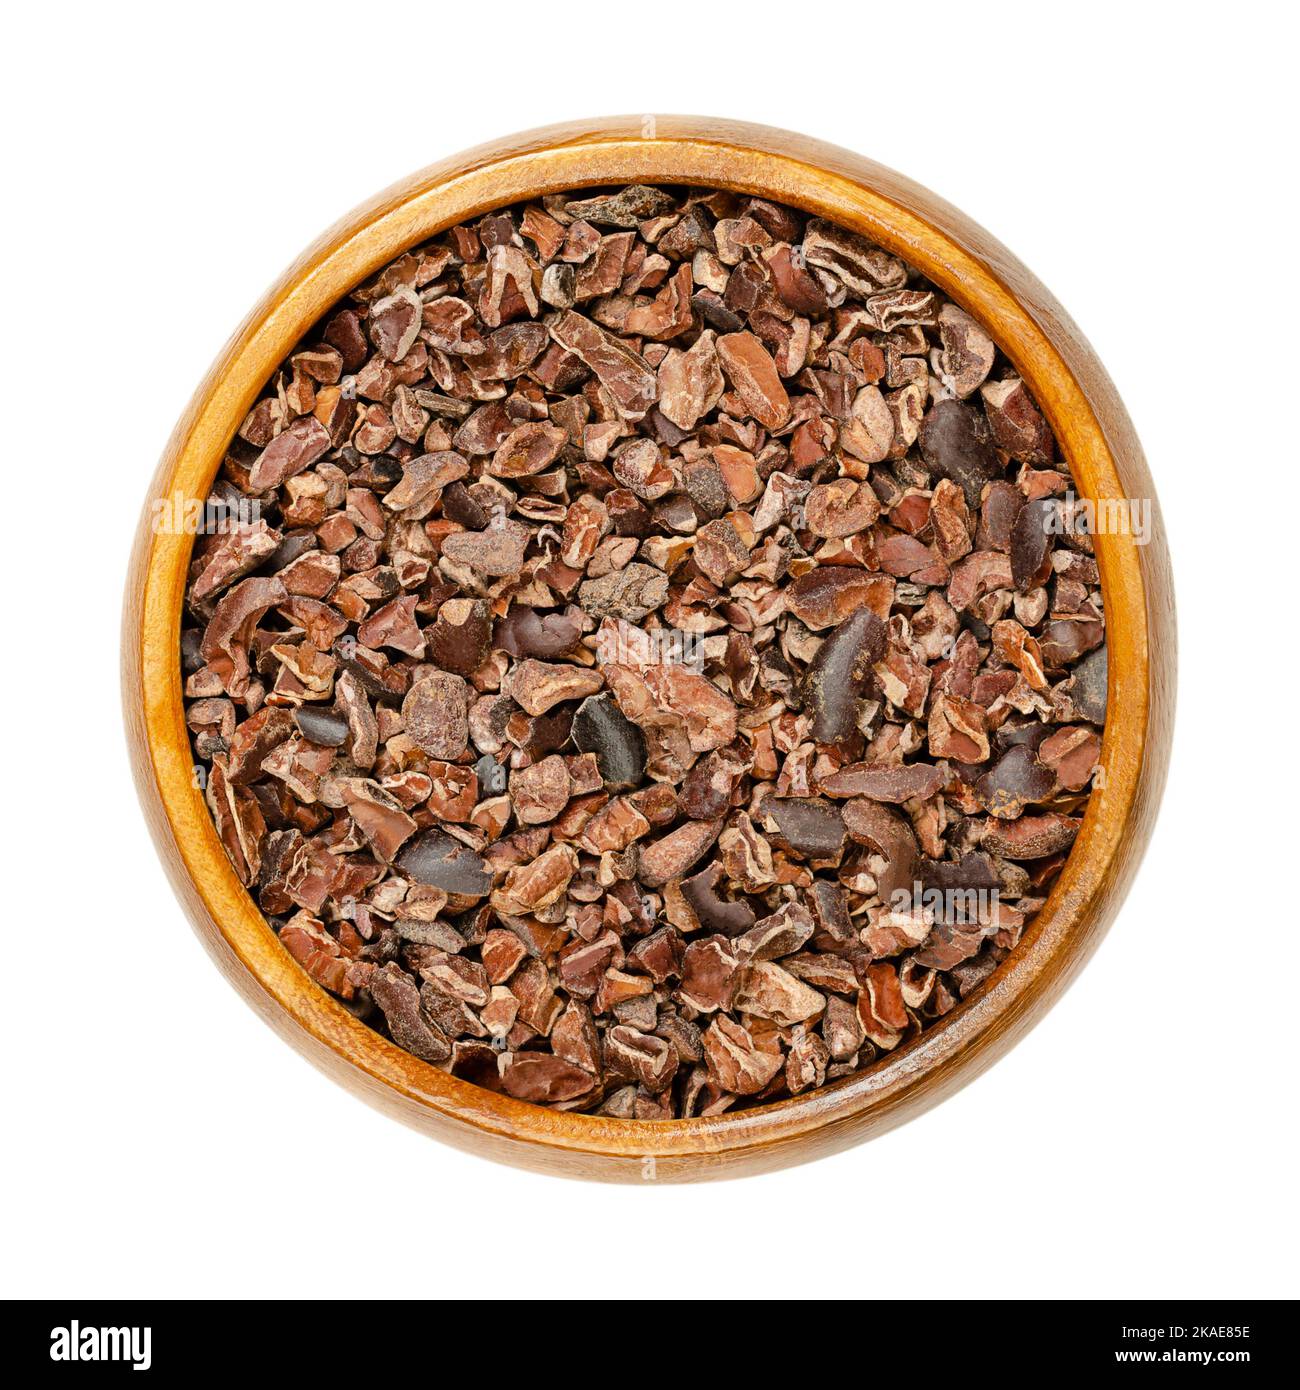 Cocoa nibs in a wooden bowl. Pieces of dried fermented kernels of cocoa beans, seeds of Theobroma cacao, generally processed into chocolate. Stock Photo